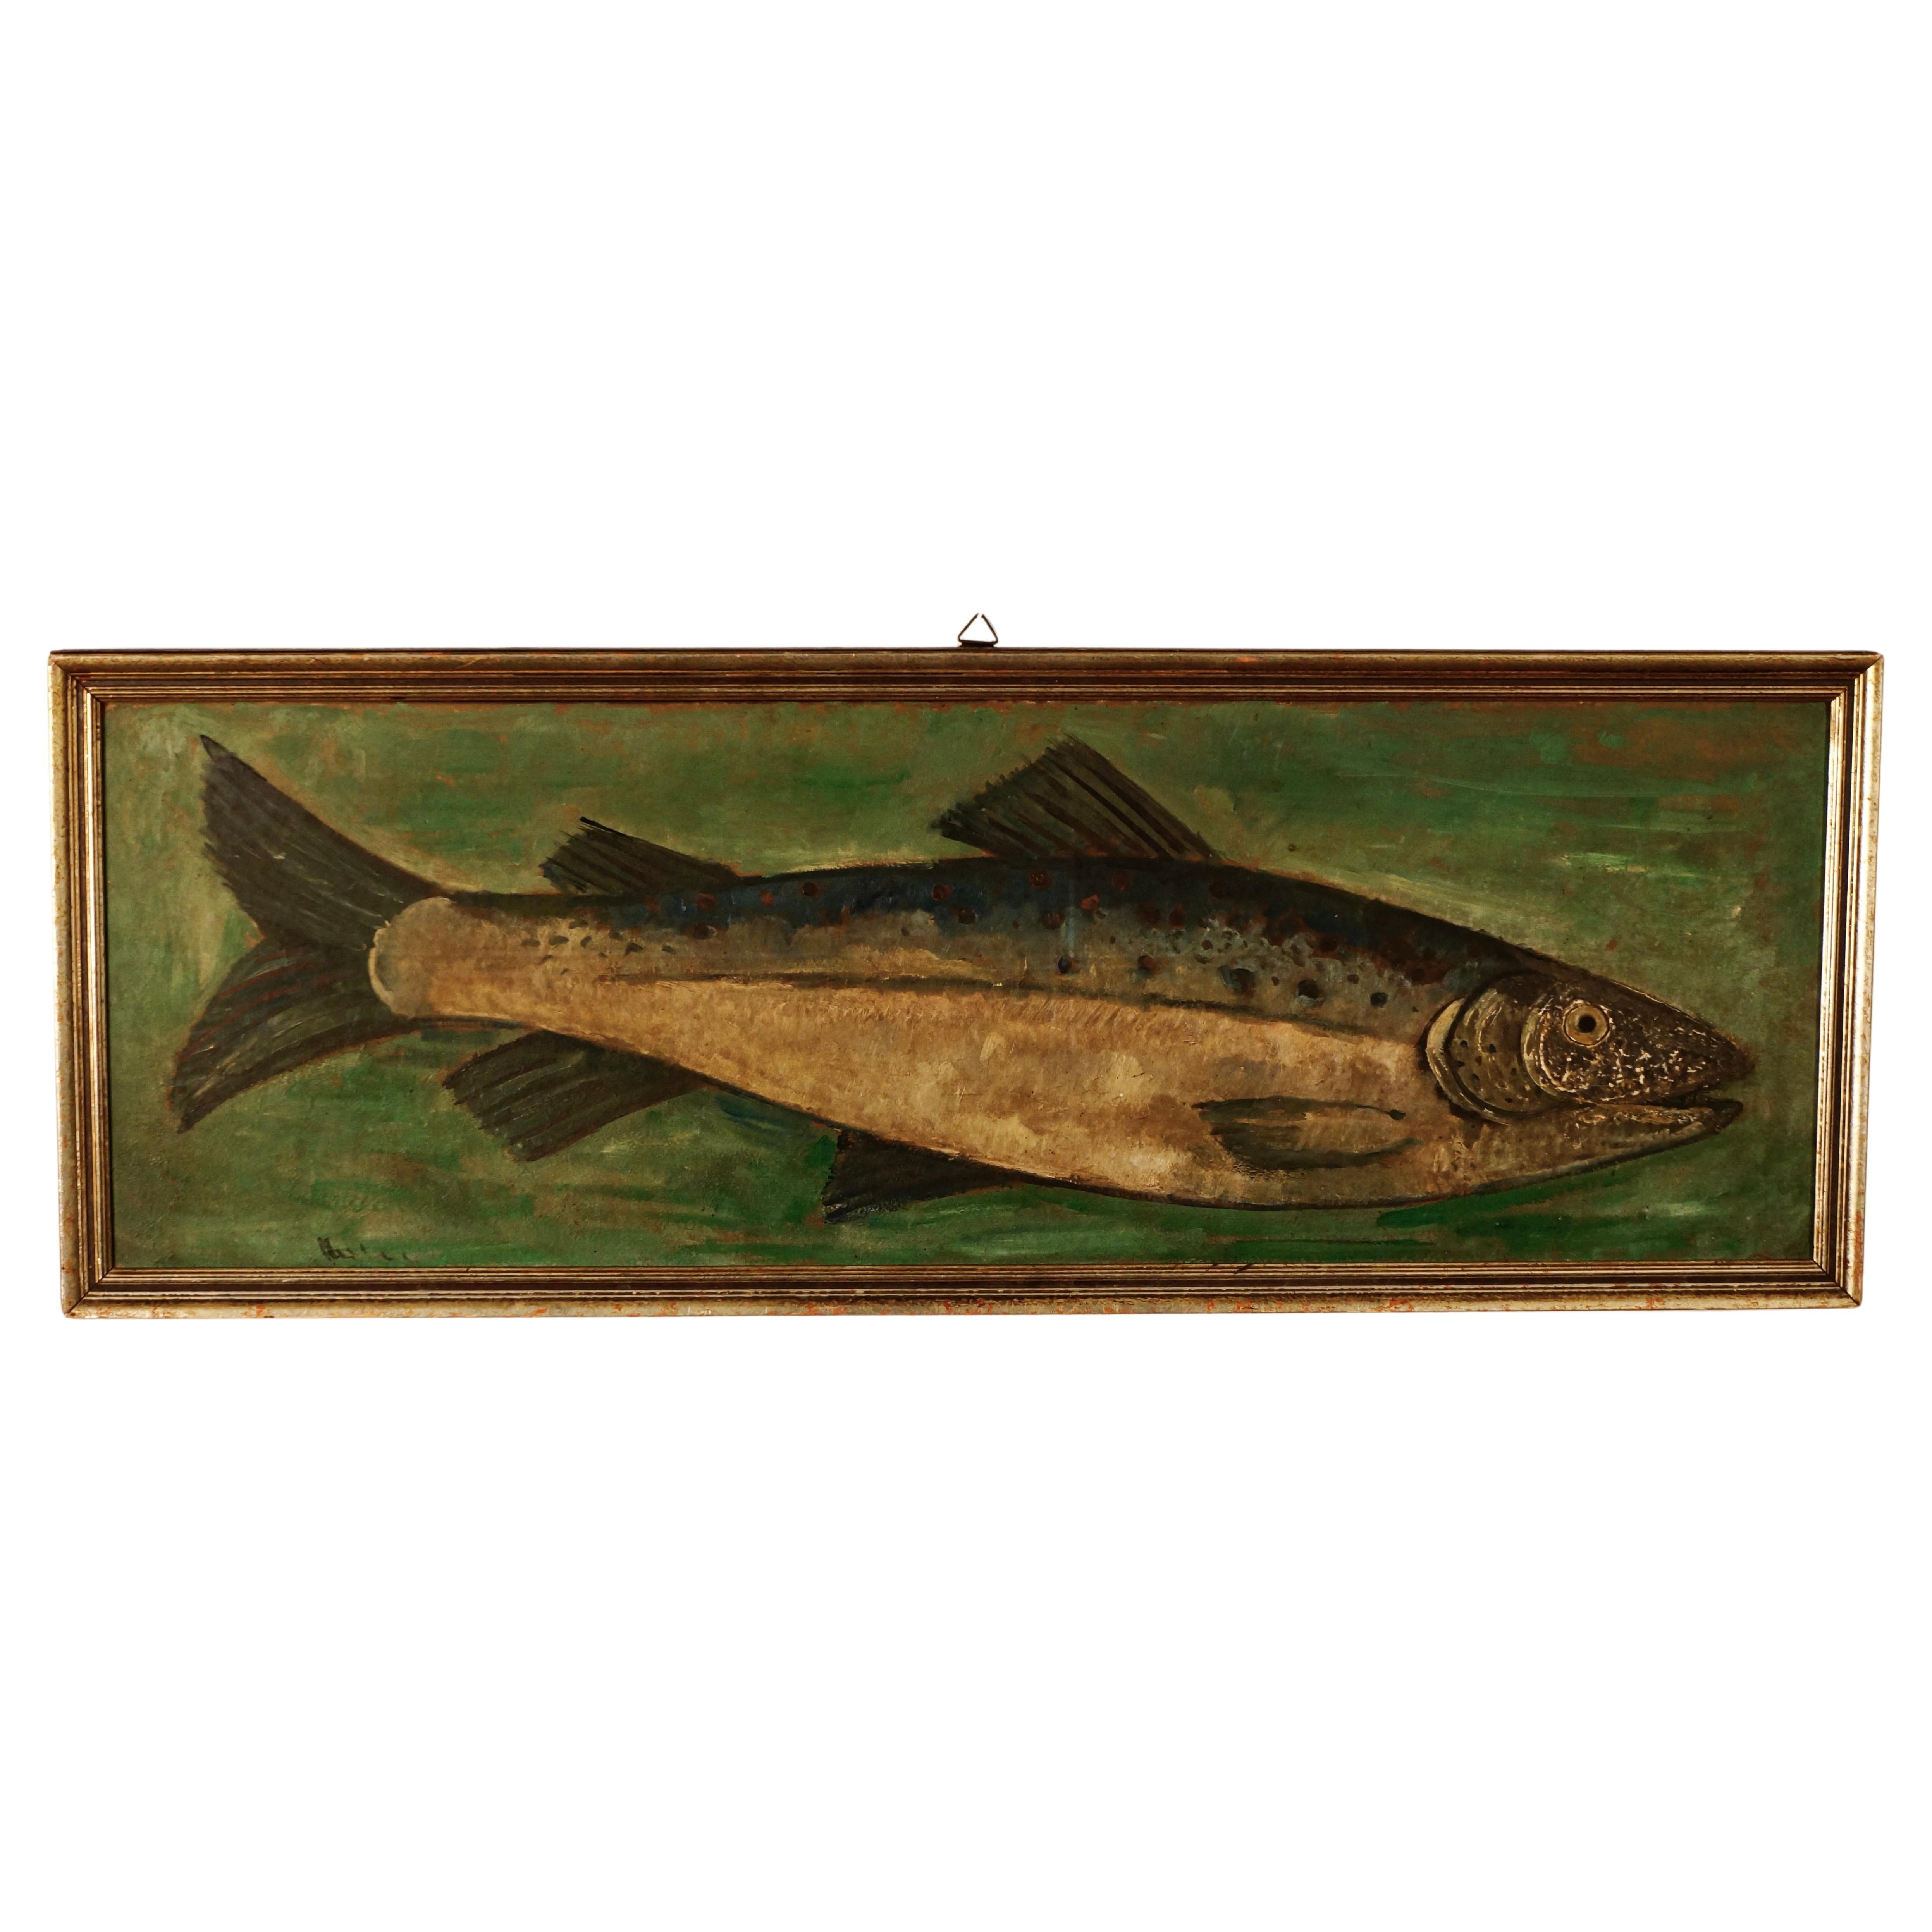 Fish Painting "Catch of the Day" Signed by the Artist circa 1950